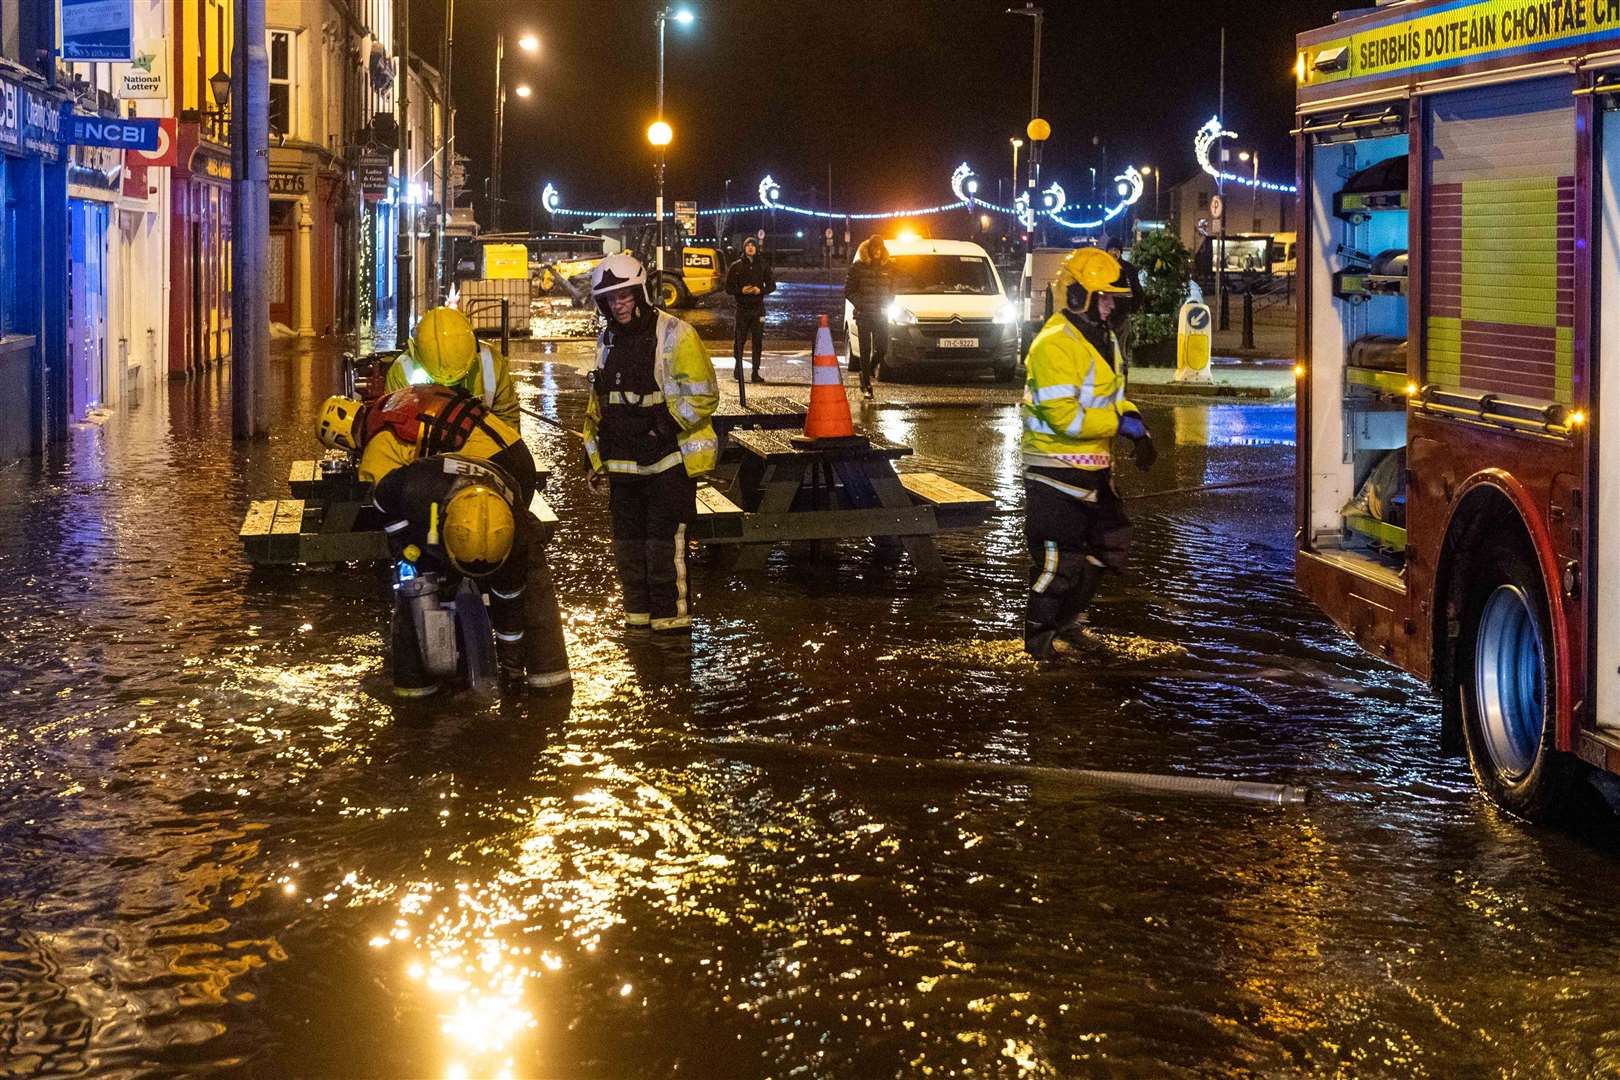 Firefighters pump floodwaters in Bantry, County Cork, after Storm Barra hit the UK and Ireland with disruptive winds, heavy rain and snow.  (Andy Gibson / AP)